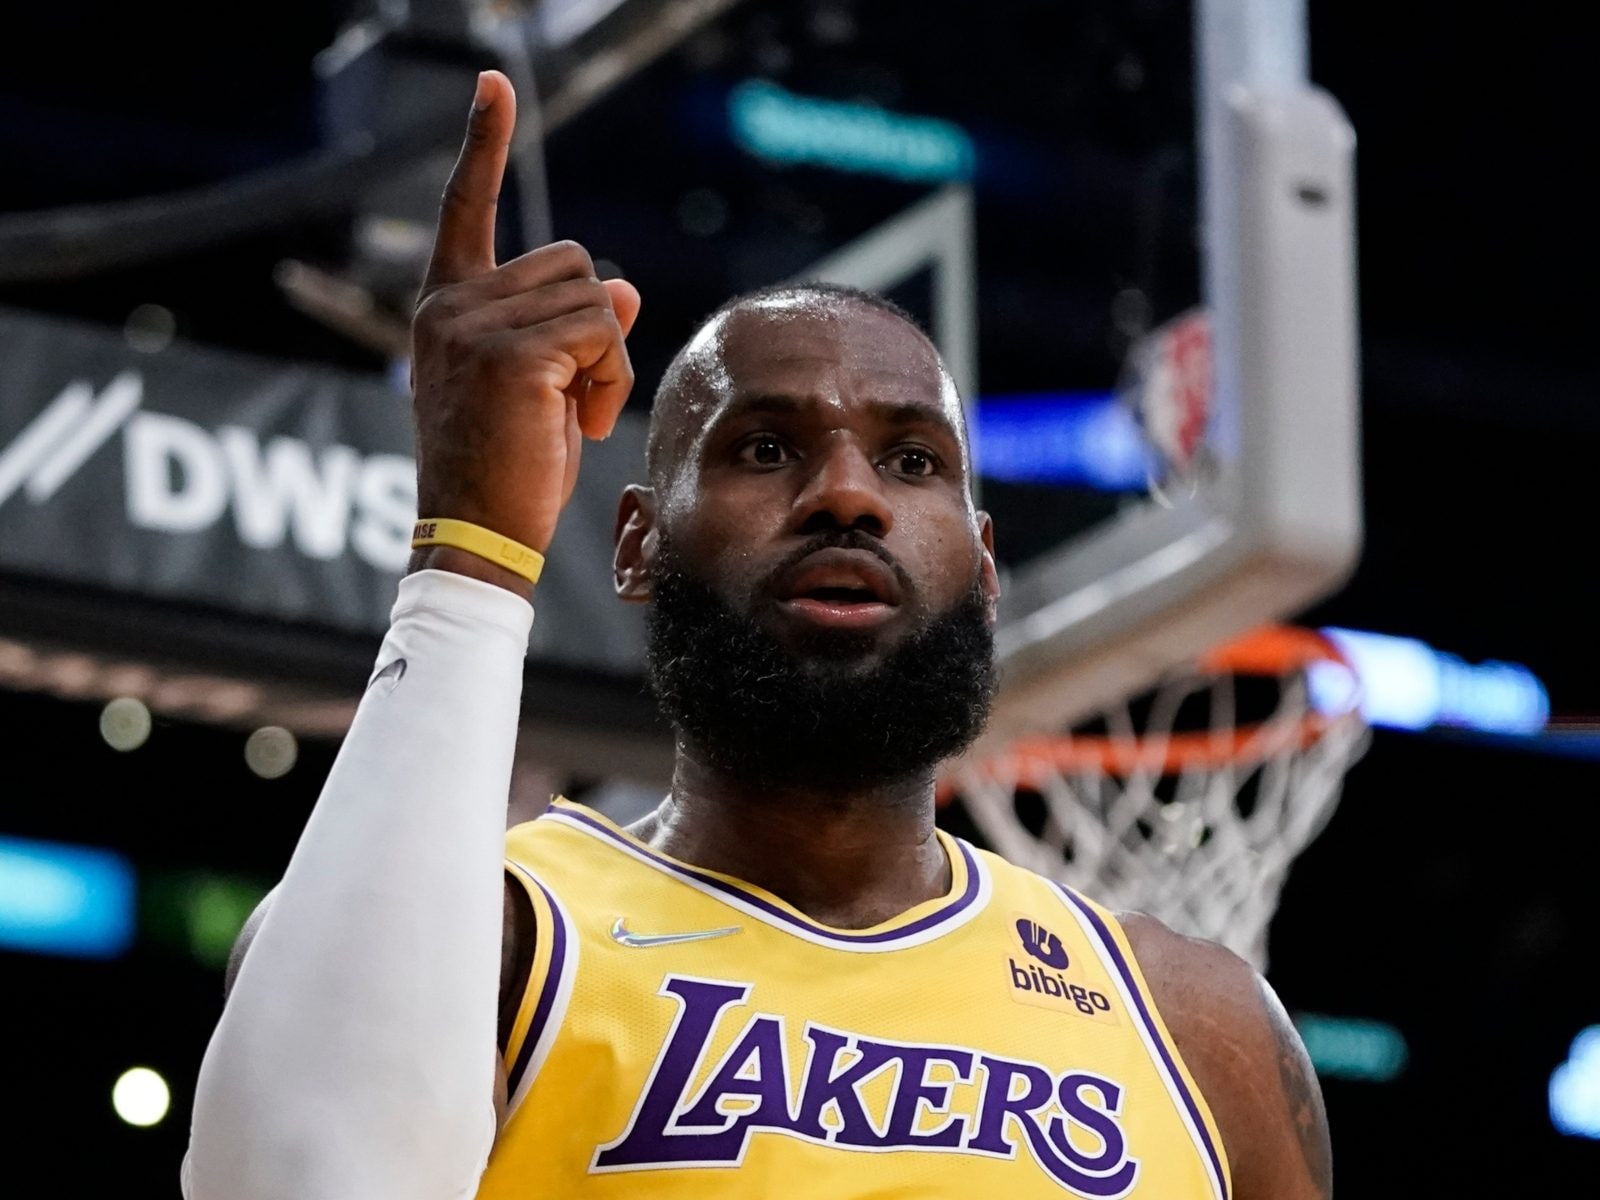 LeBron James agrees to $97 million contract extension with Lakers